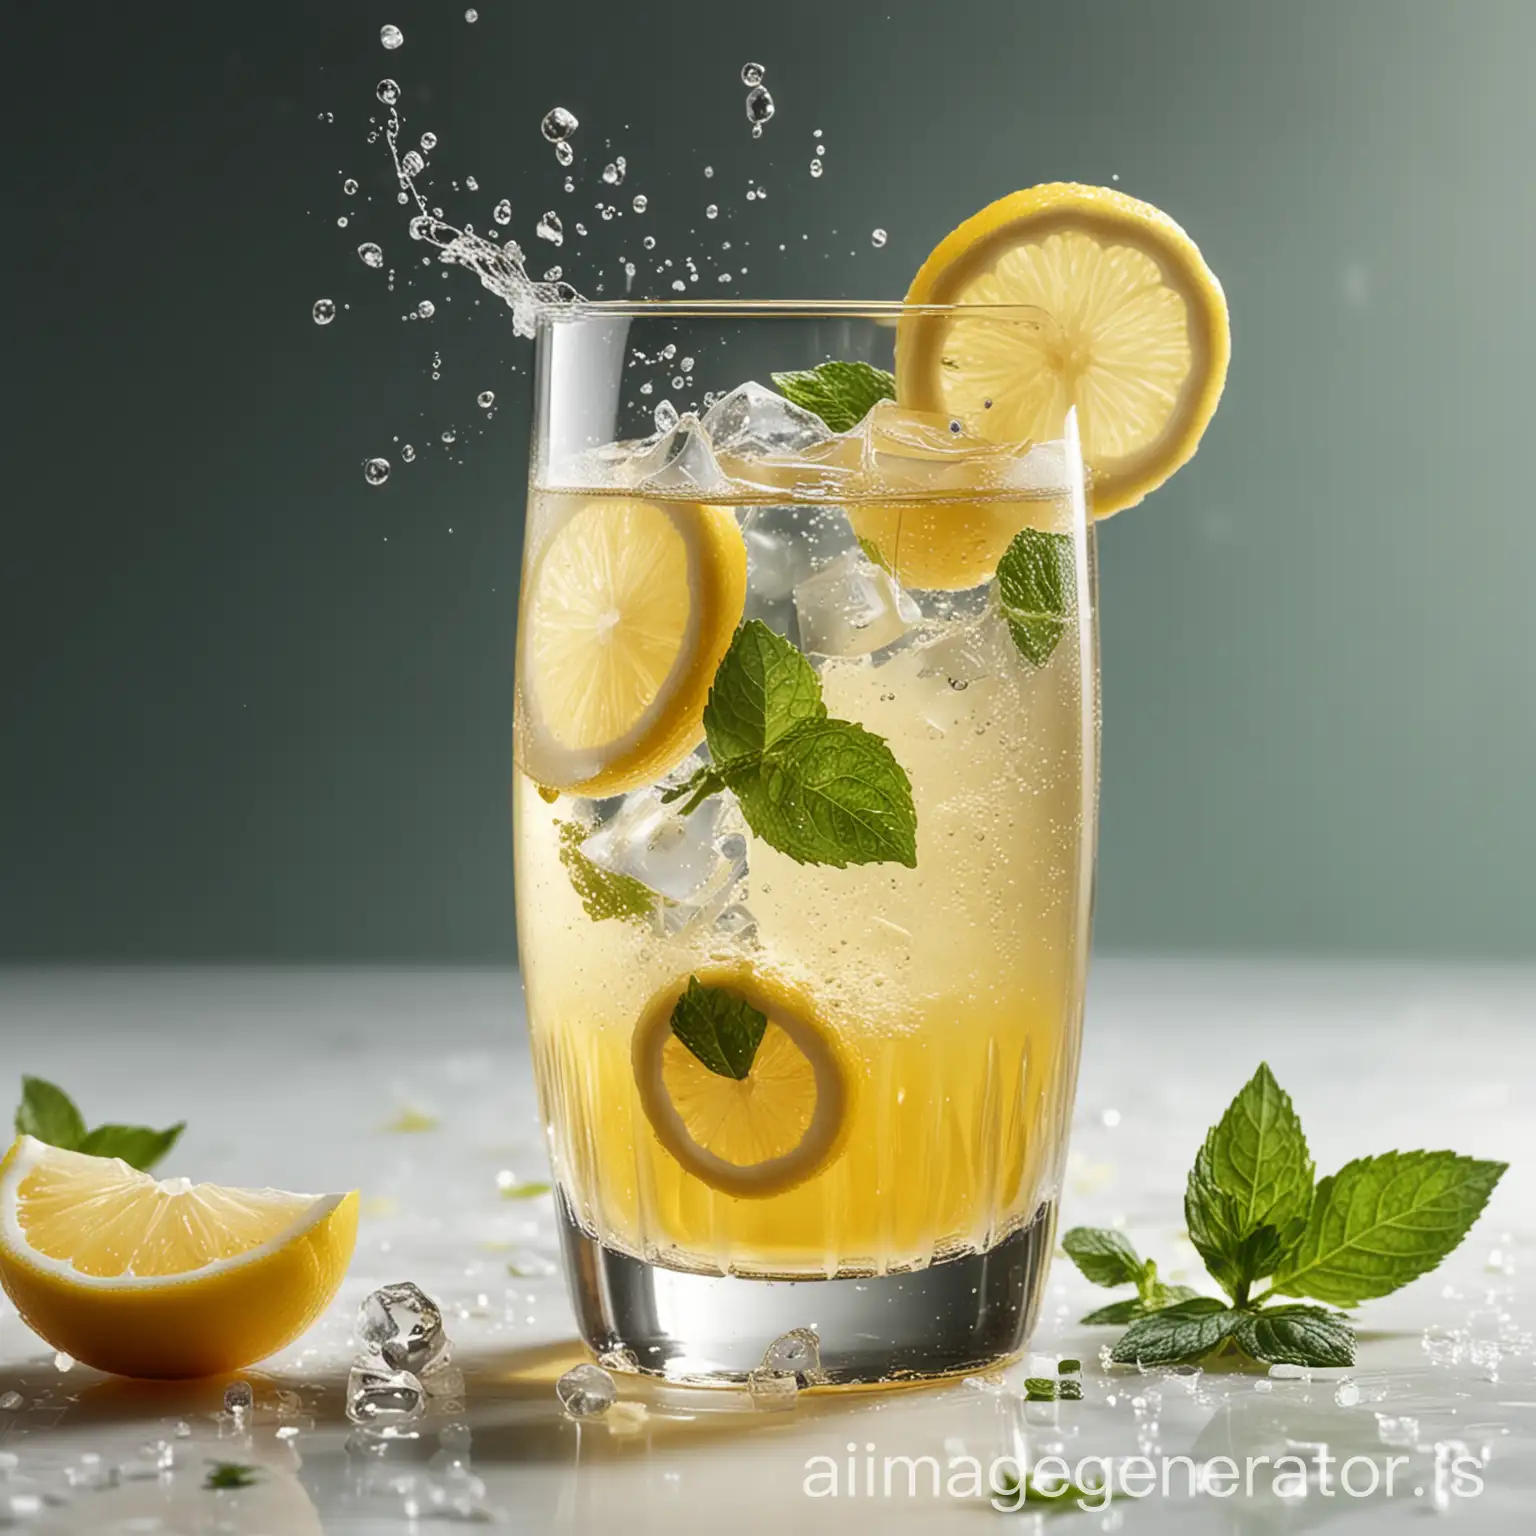 Refreshing-Lemon-Champagne-Cocktail-with-Ice-and-Mint